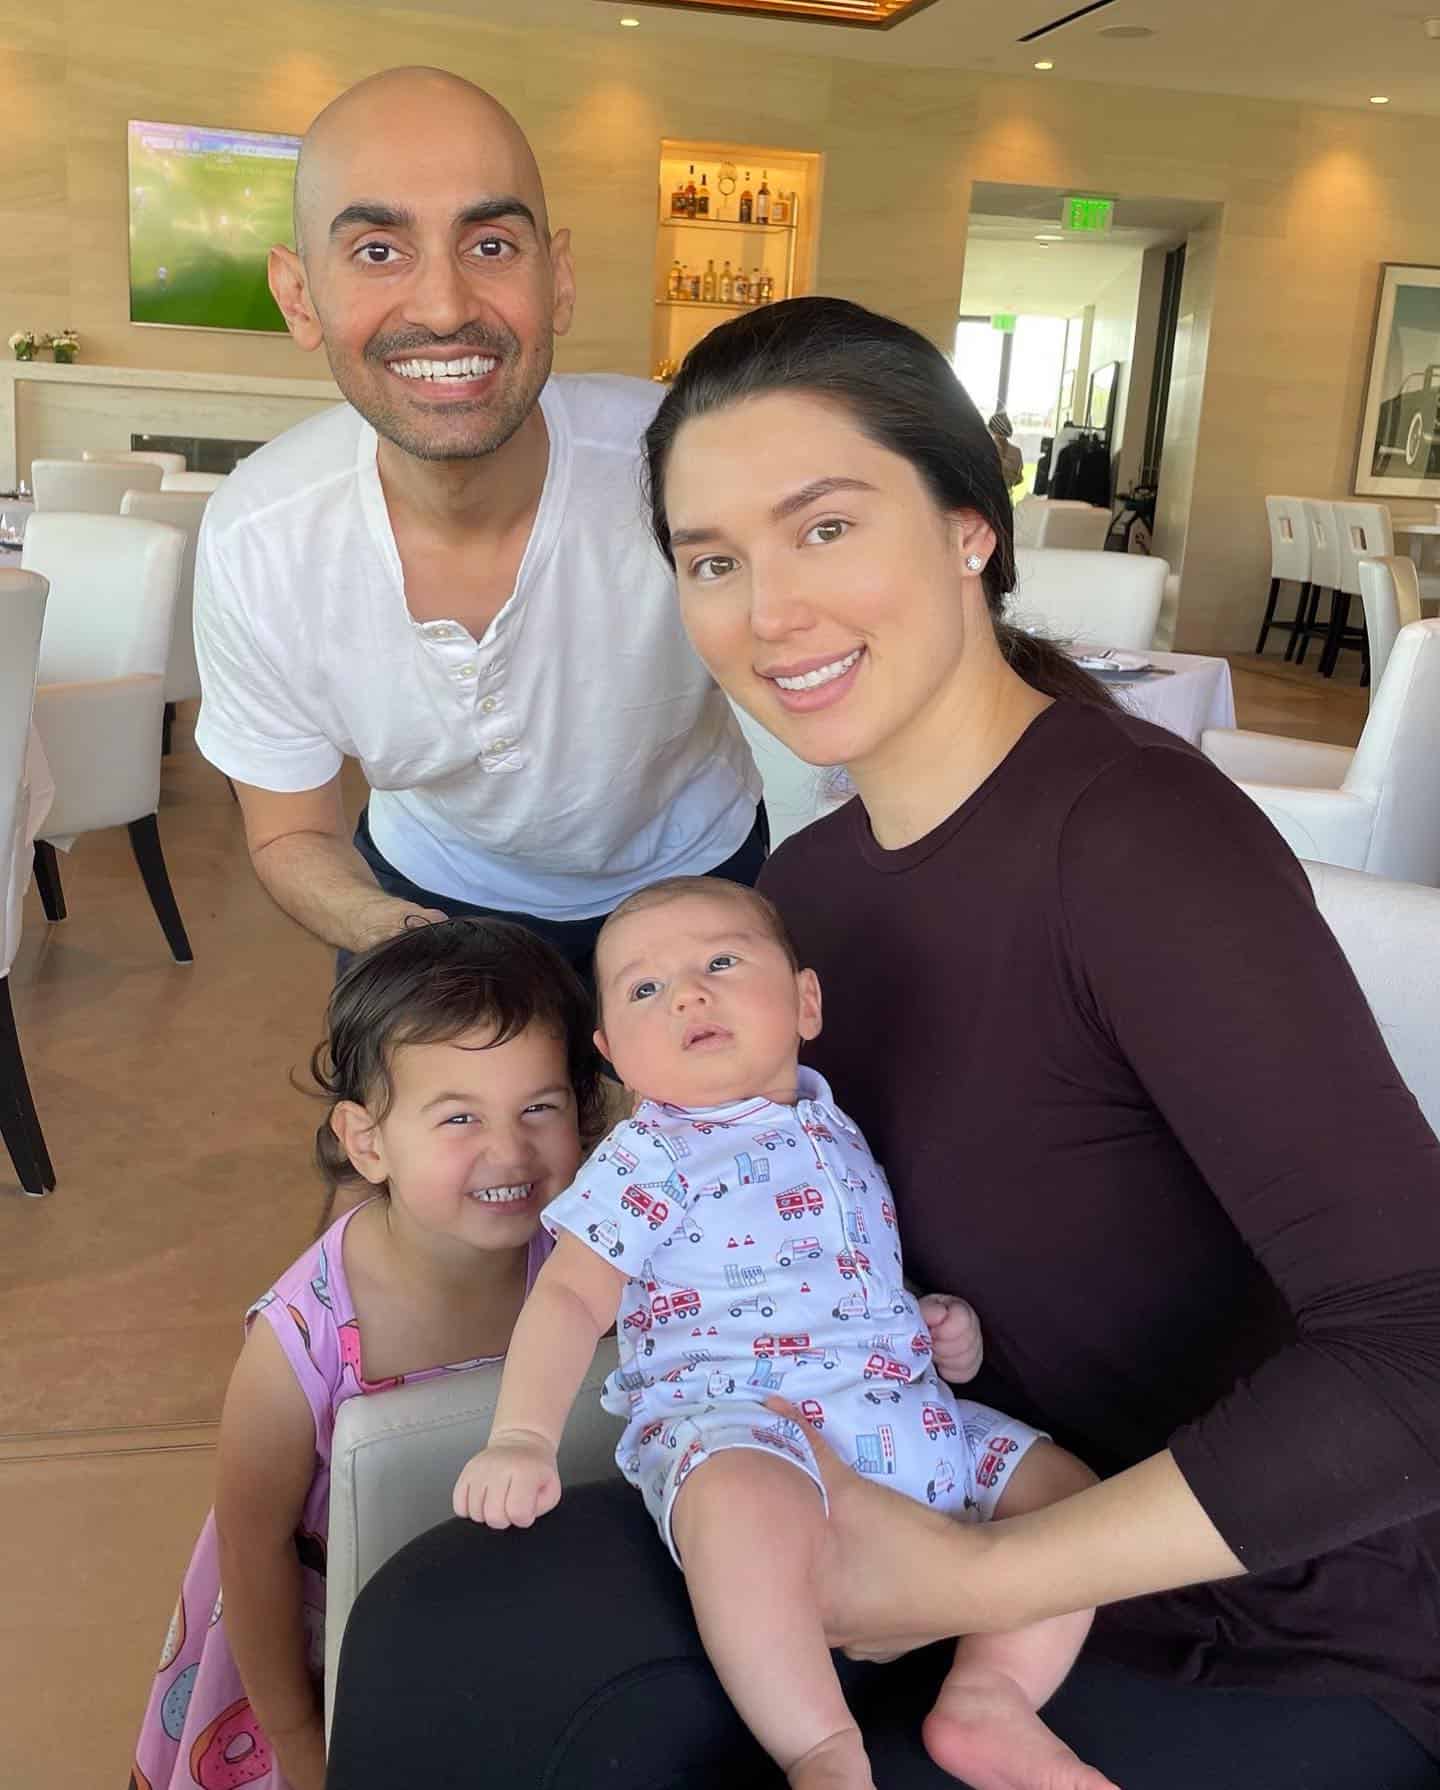 Neil Patel's wife and children with him